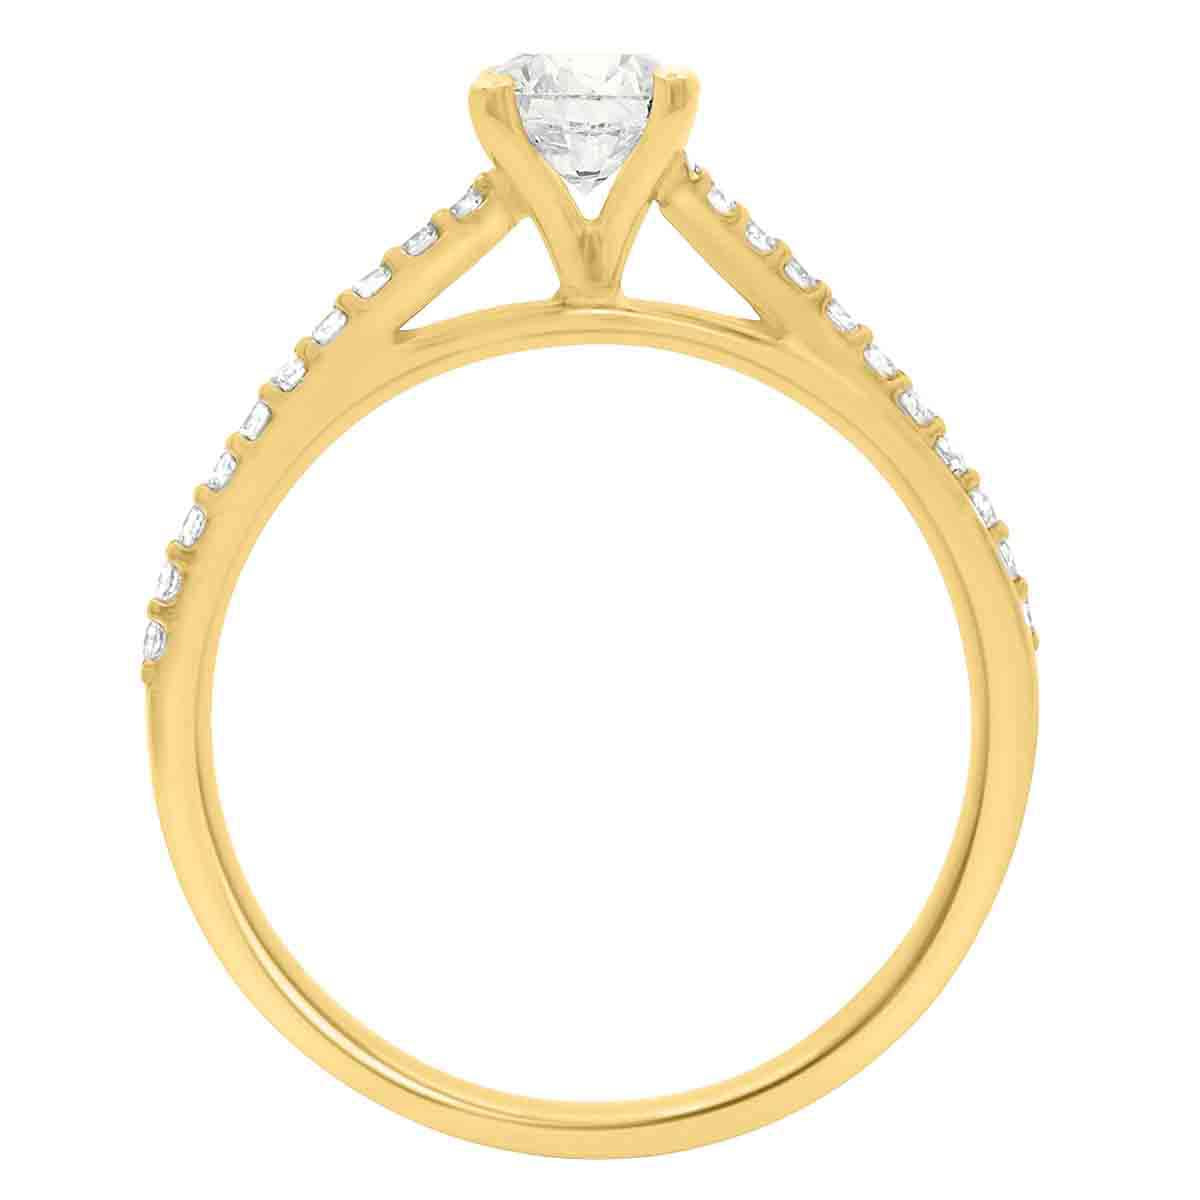 Debeers Promise Ring Style in yellow gold standing in an upright position